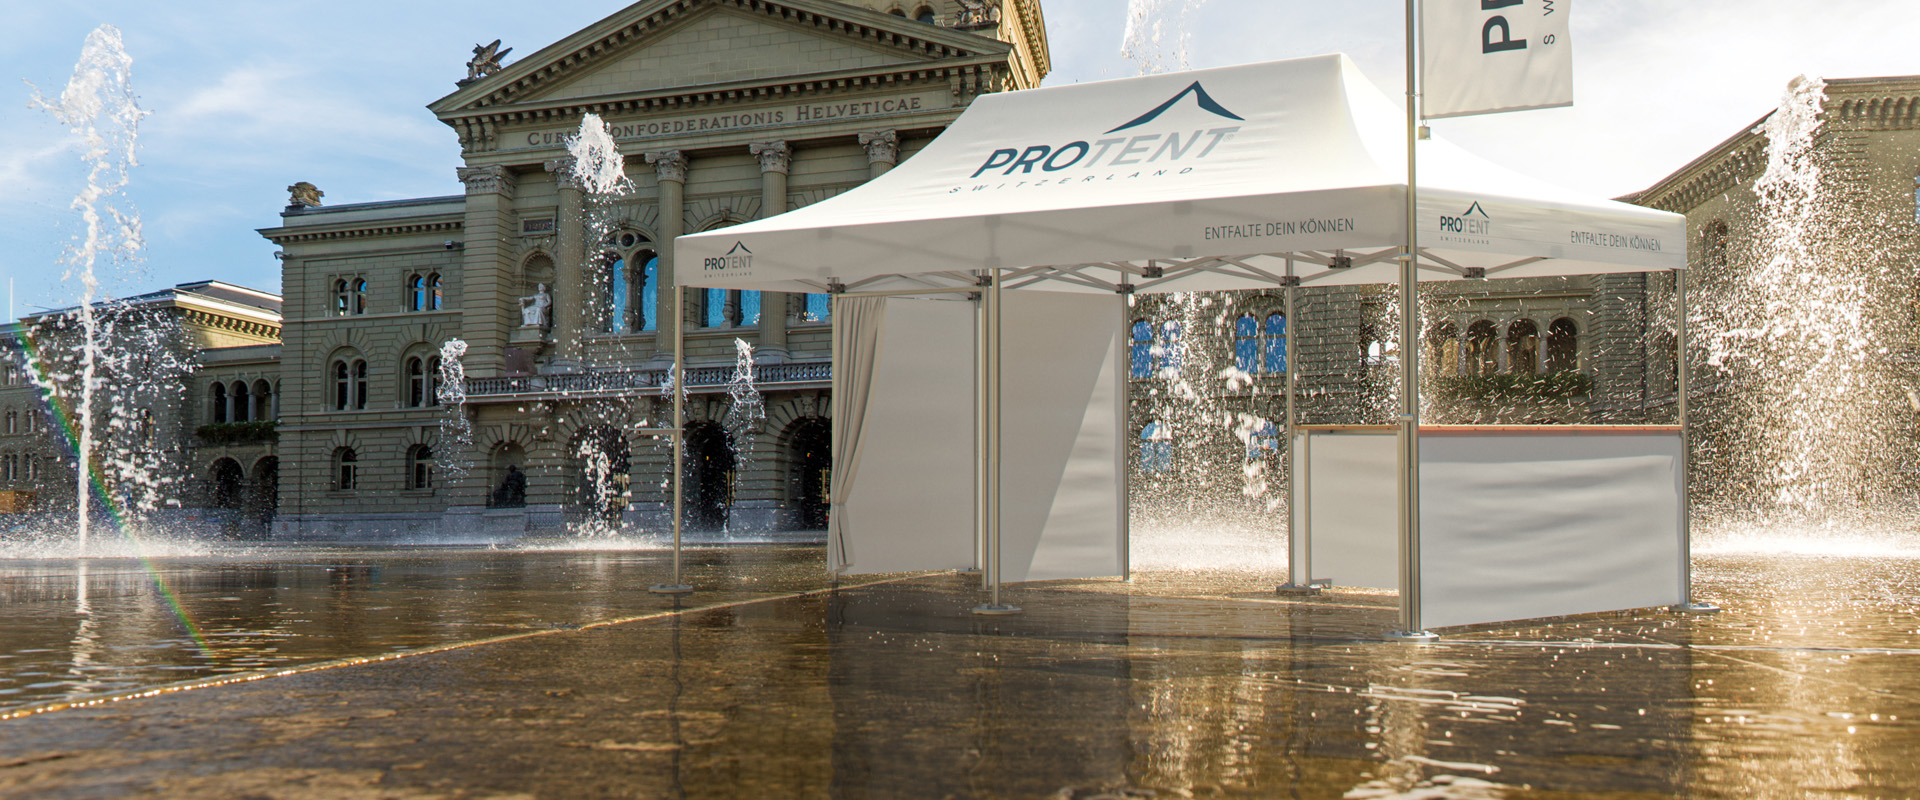 A Pro-Tent folding tent stands in front of the Federal Palace in Bern.